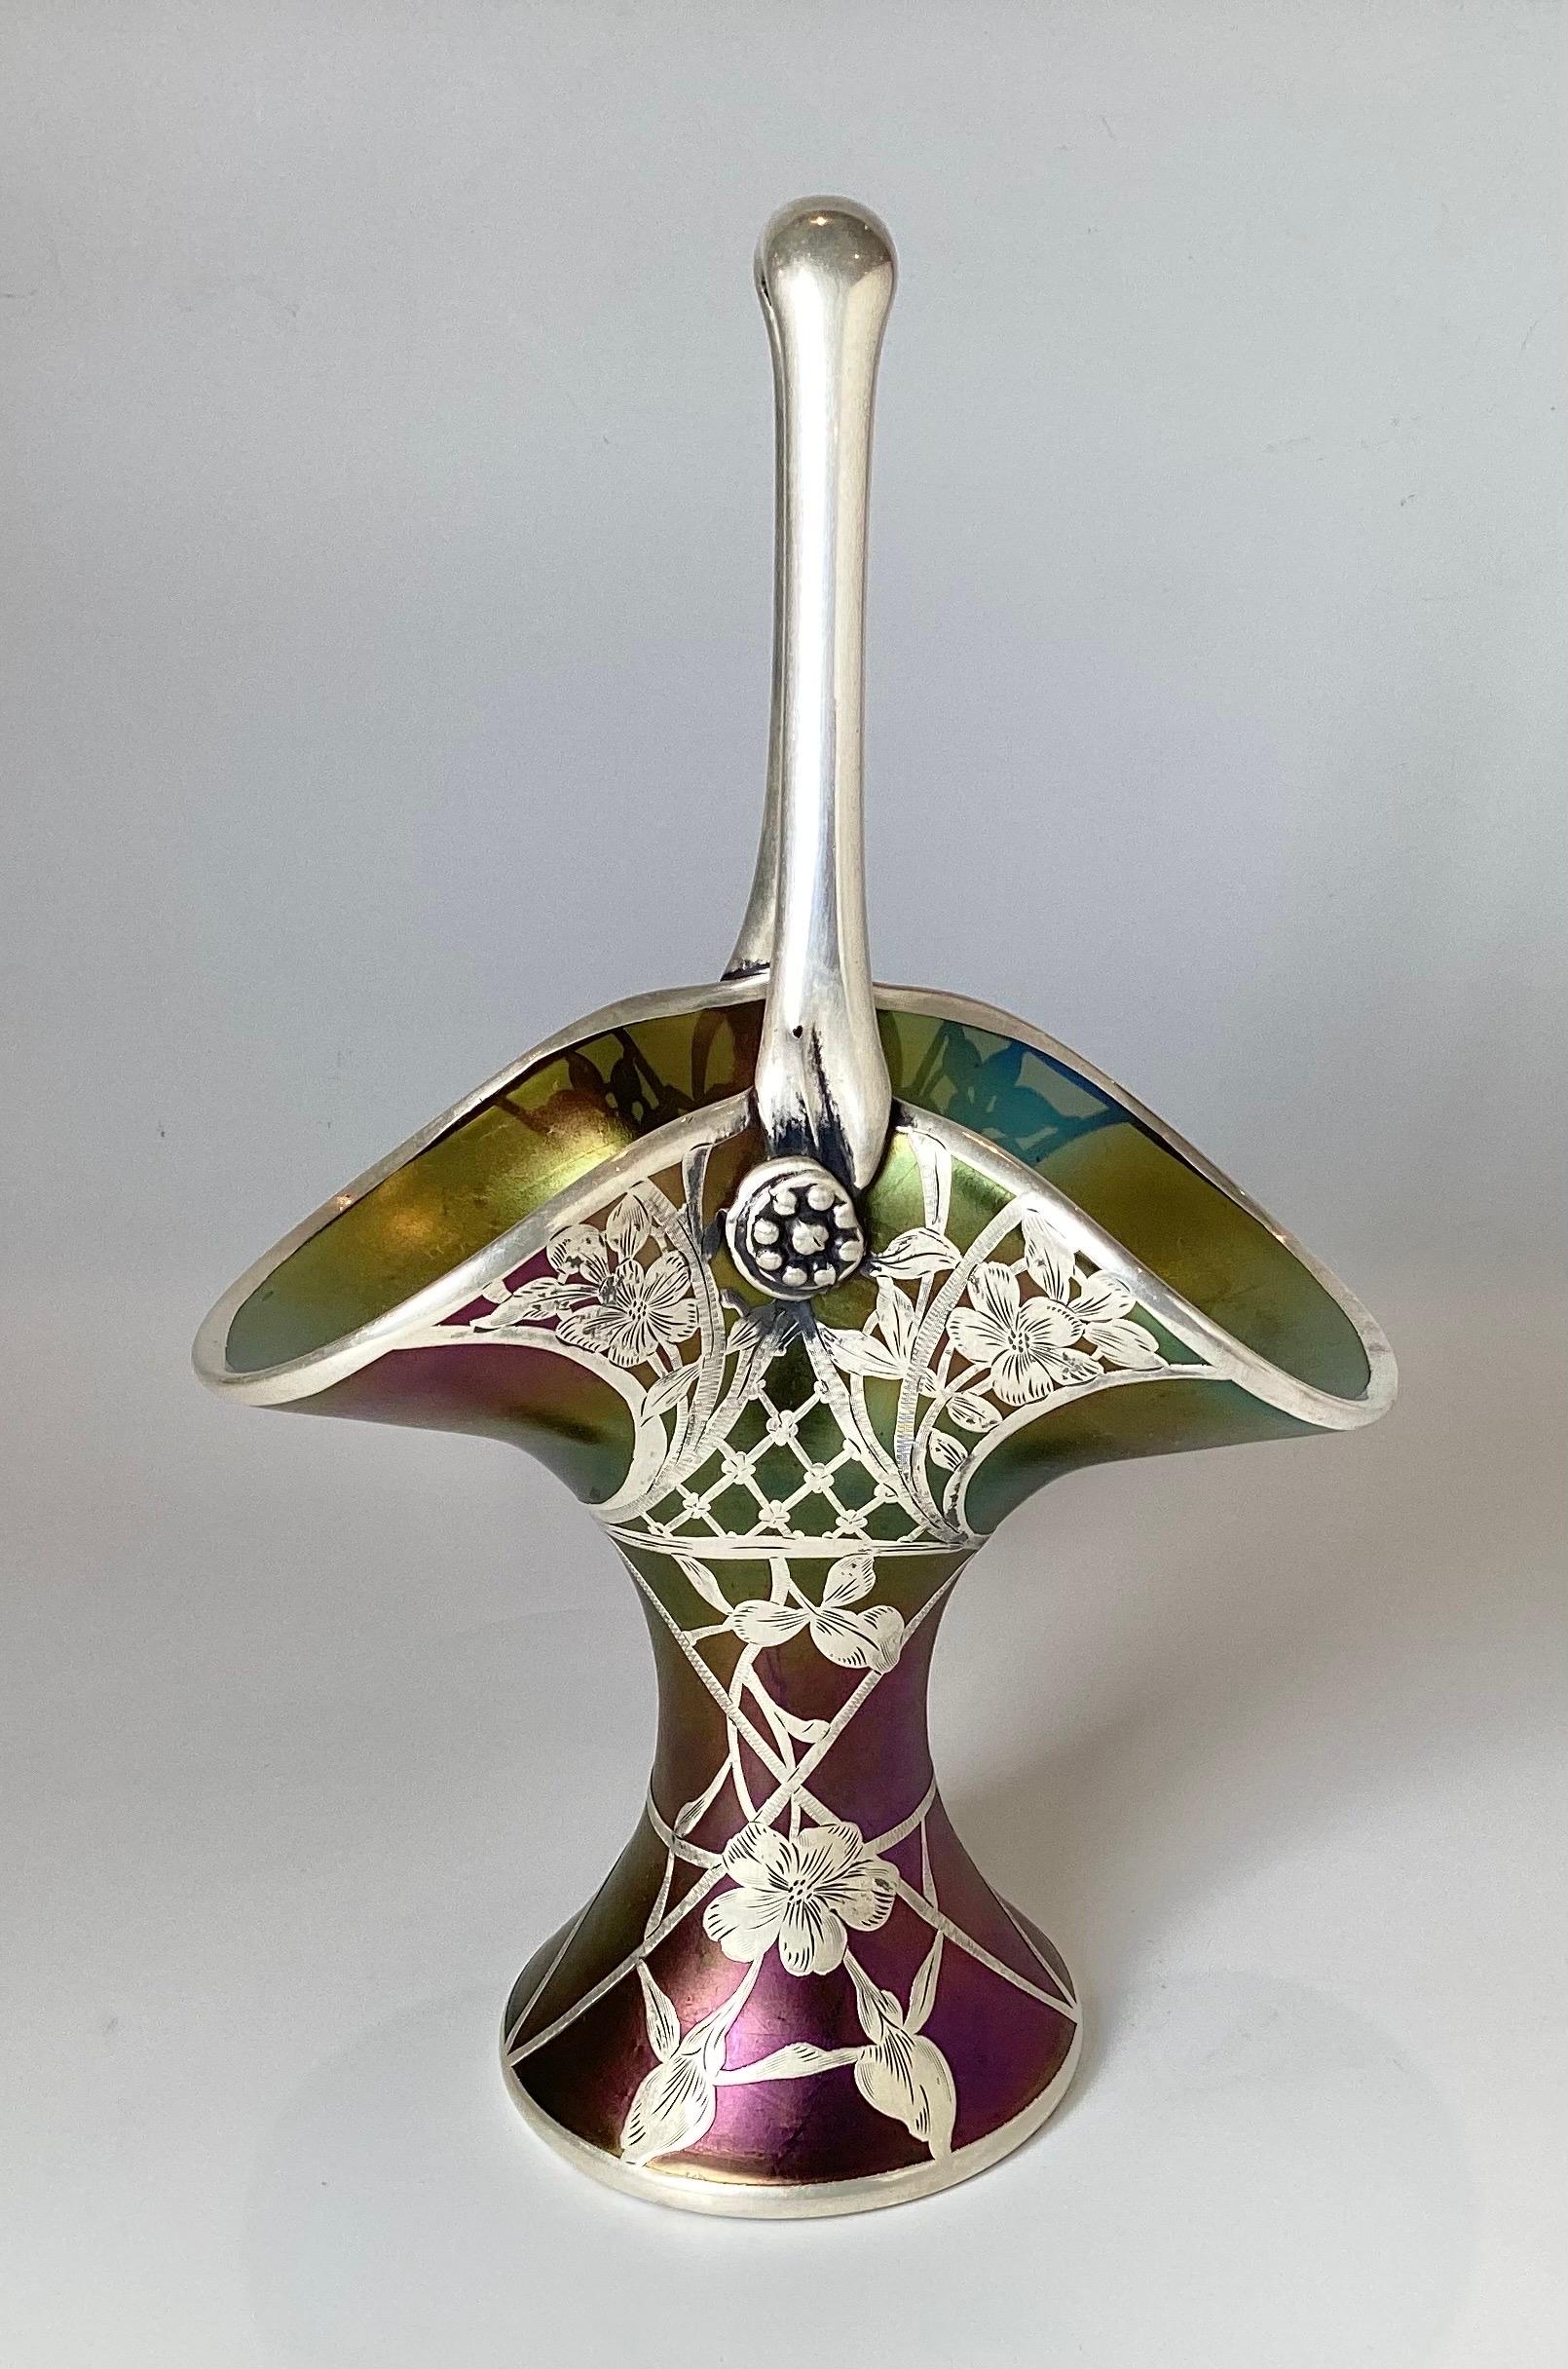 Remarkable Loetz iridescent sterling silver overlay art glass basket vase. The fan shaped basket with pure sterling silver fused to the glass in an Art Nouveau pattern. Excellent condition for the finest collector 10 inches tall, 7 inches wide, 5